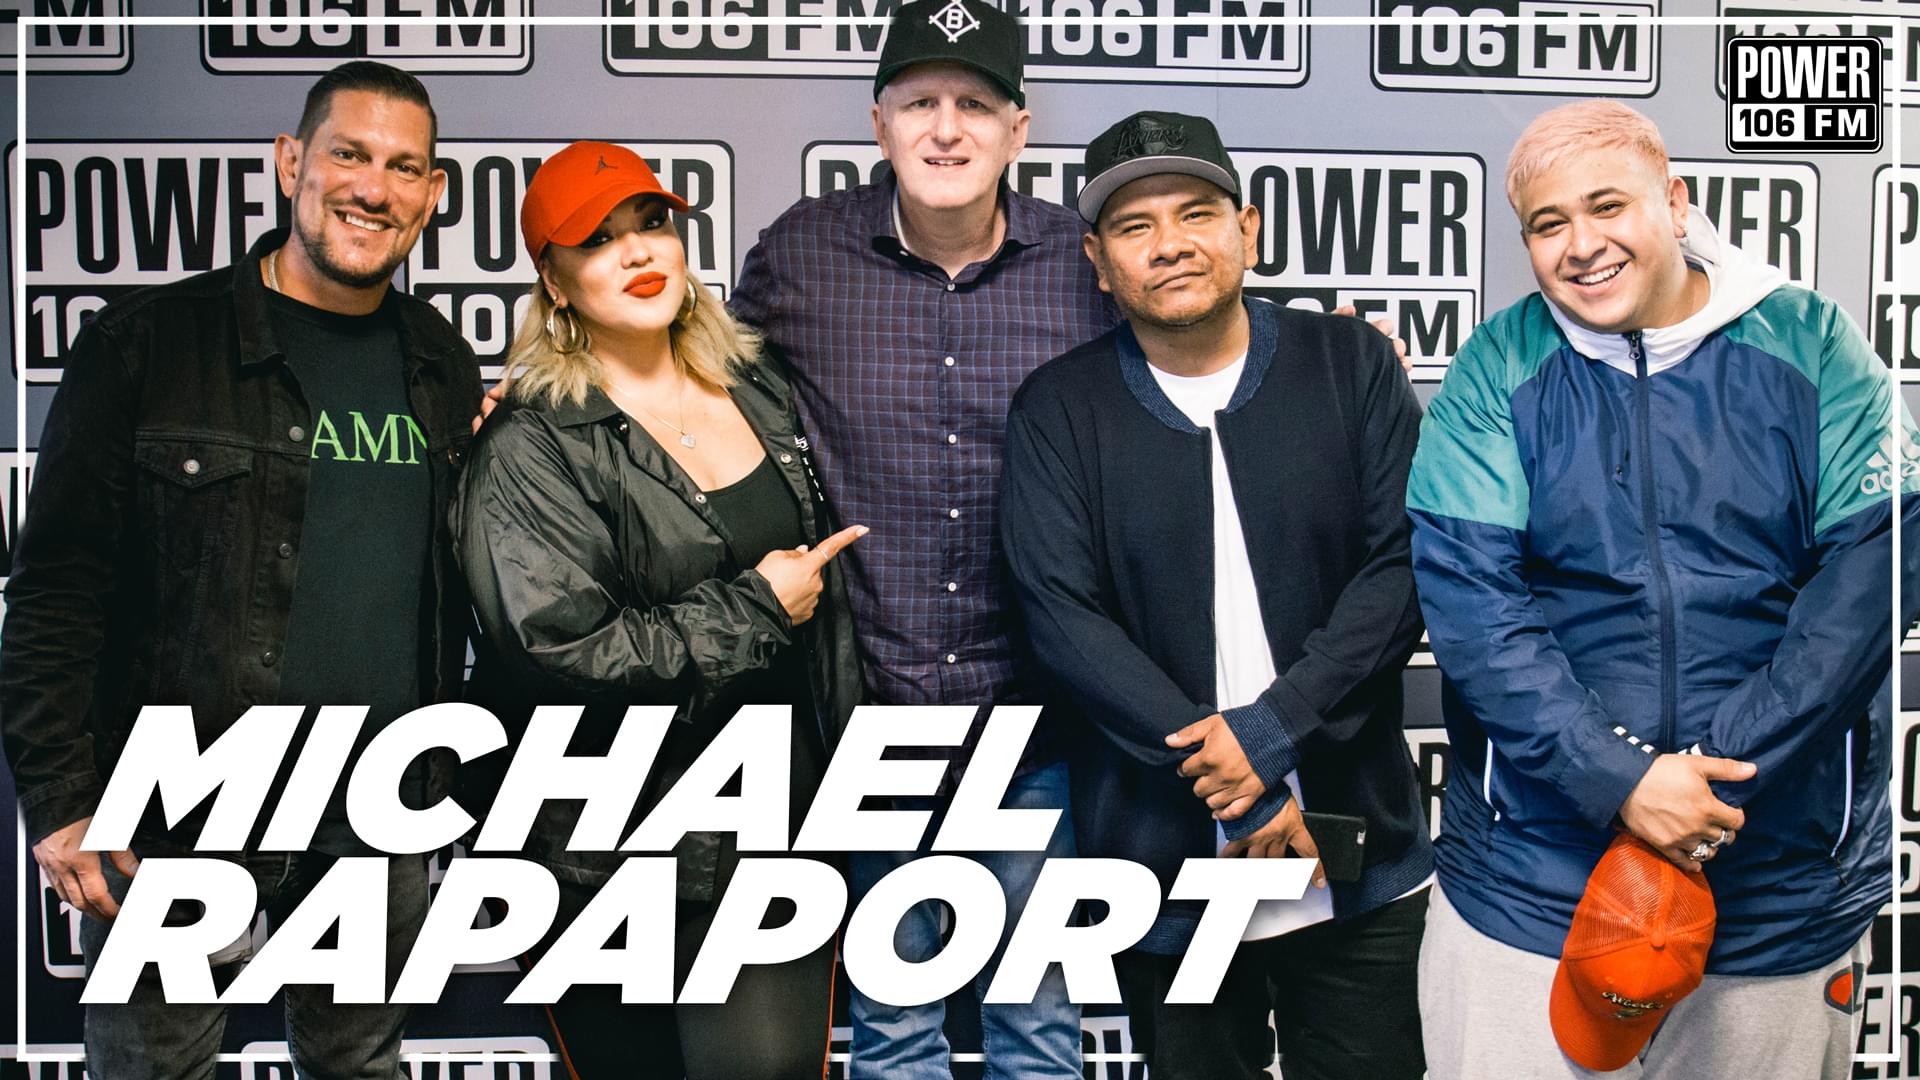 Michael Rapaport Talks Kanye West, Urges You To Vote & More With #TheCruzShow [WATCH]